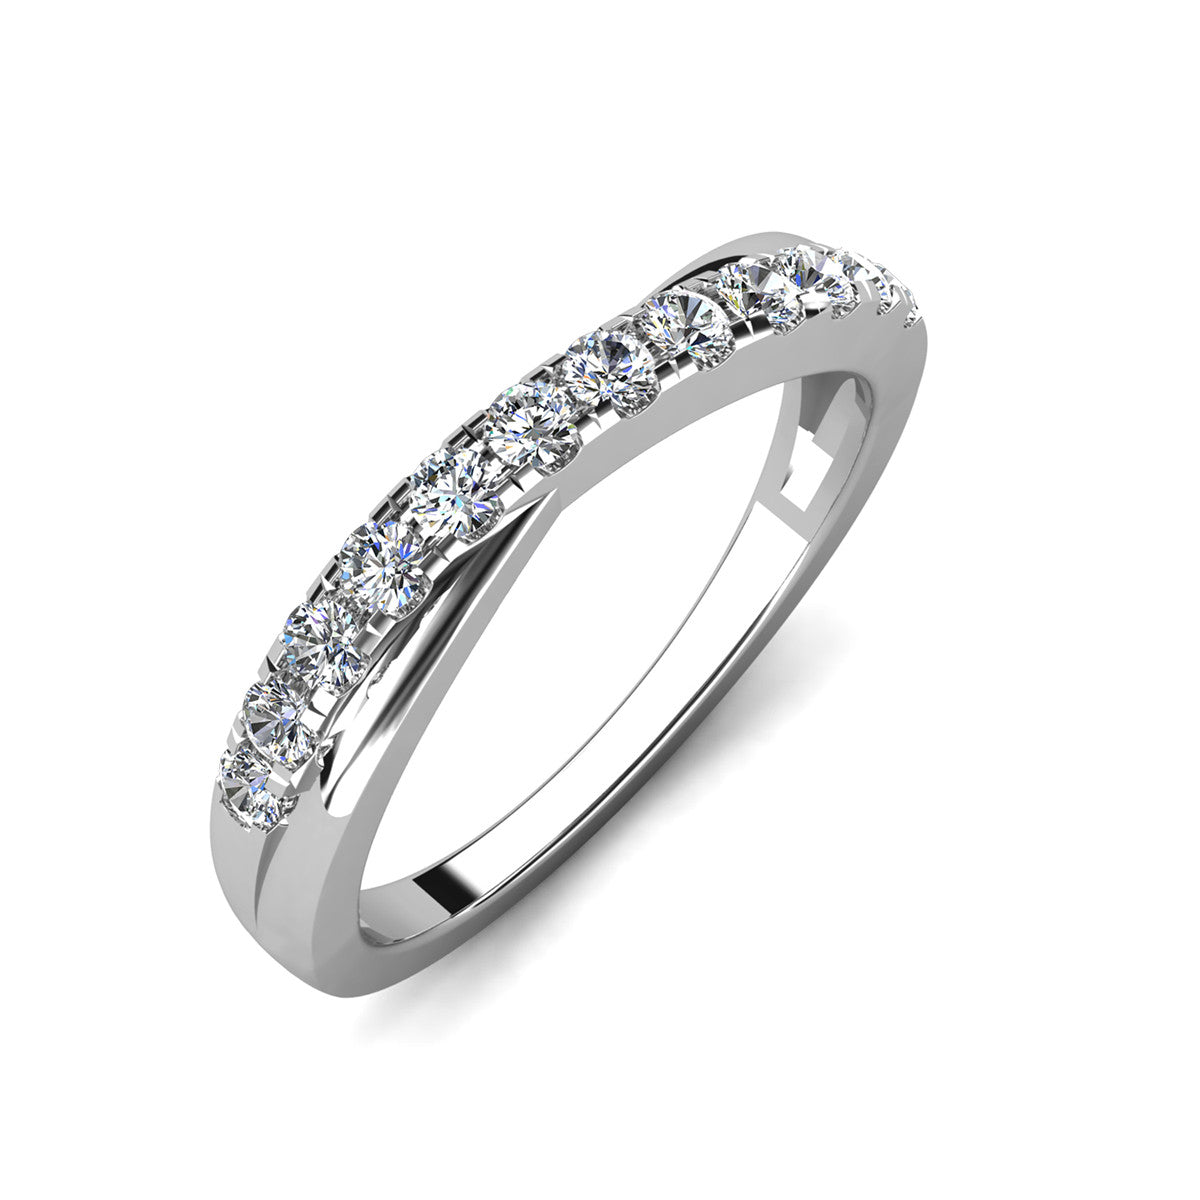 Moissanite by Cate & Chloe Emerson Sterling Silver Ring with Moissanite and 5A Cubic Zirconia Crystals